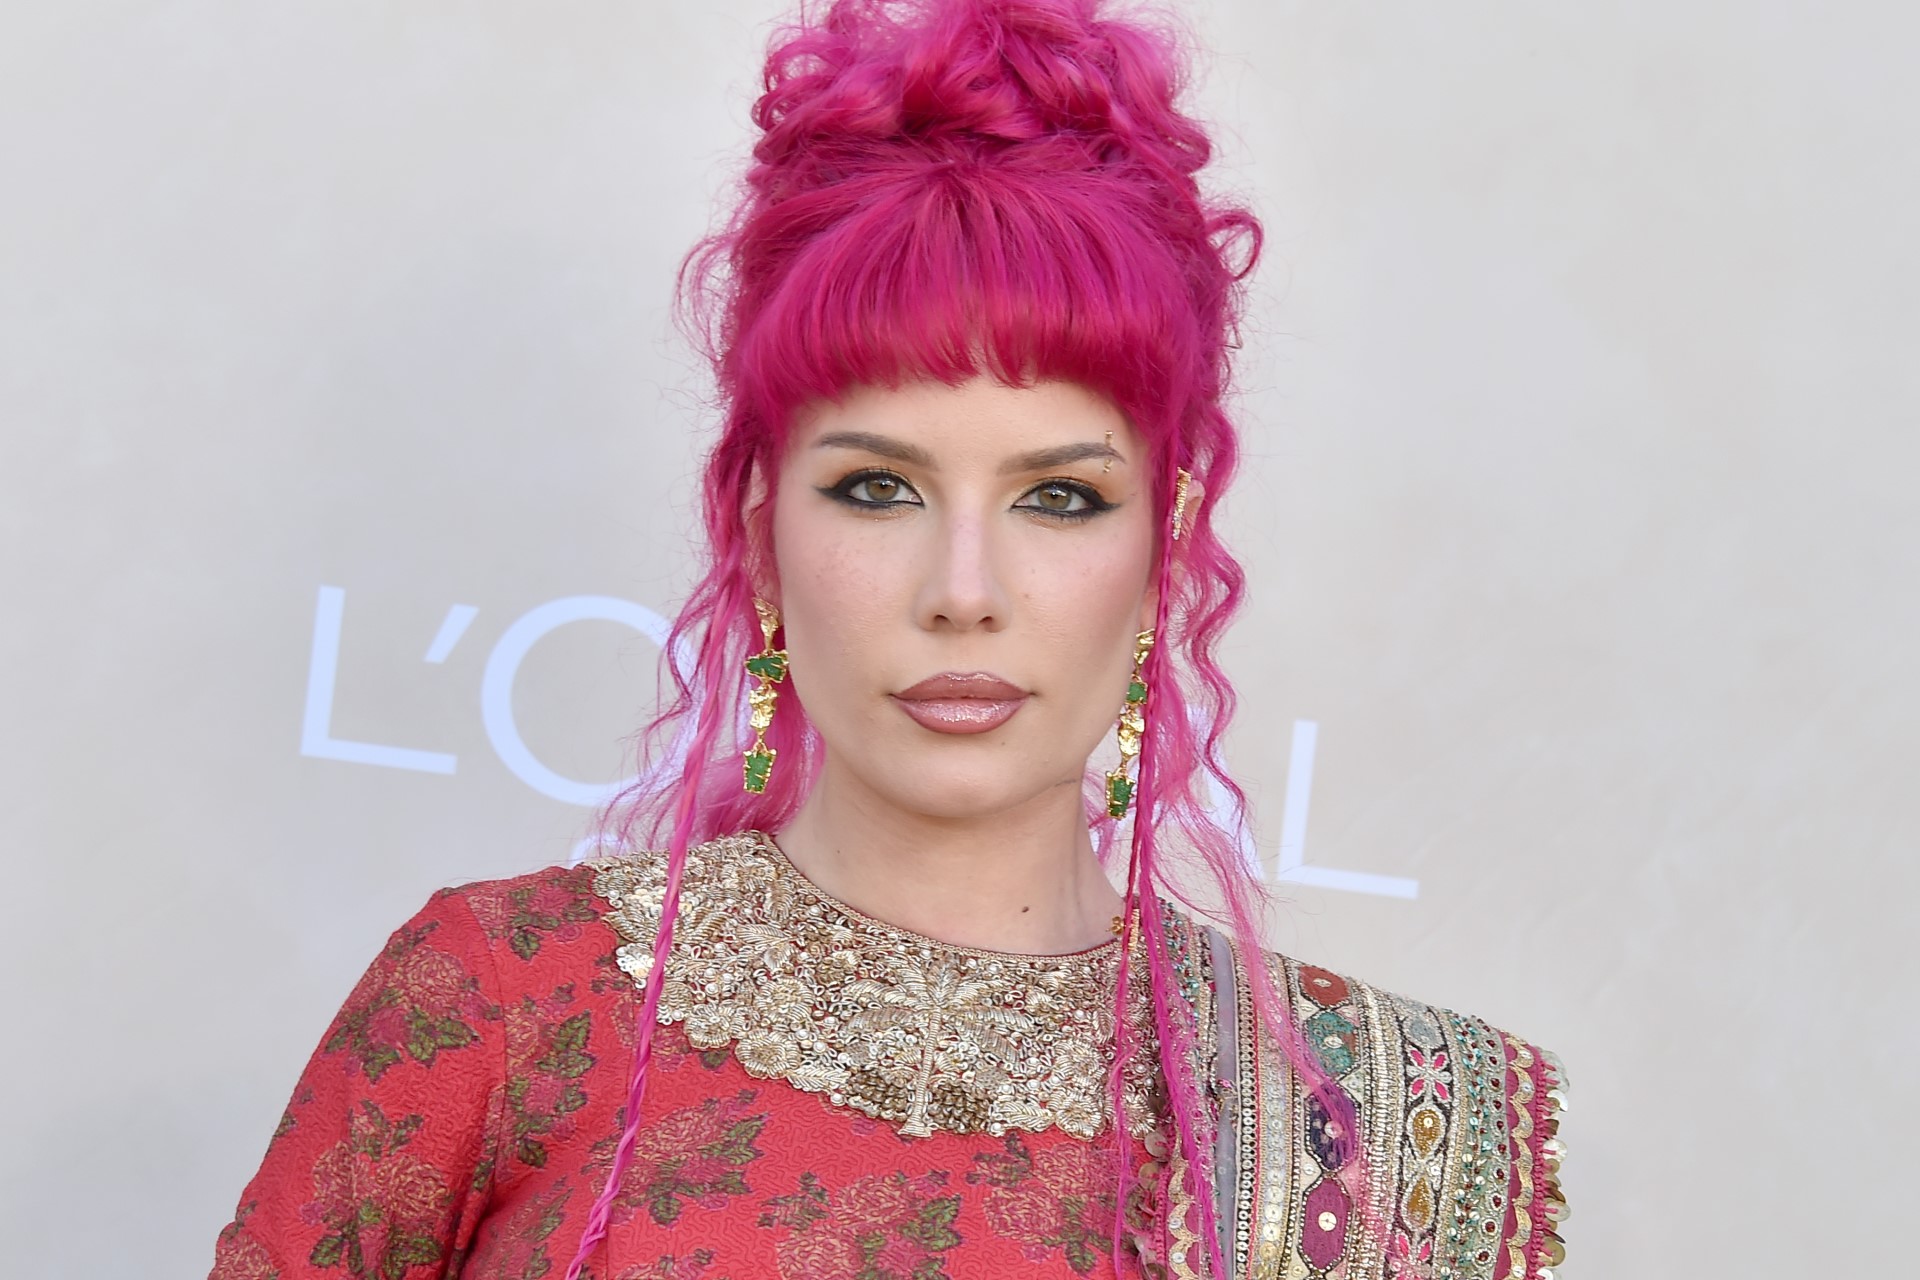 Halsey is very sick: 'Lucky to be alive'